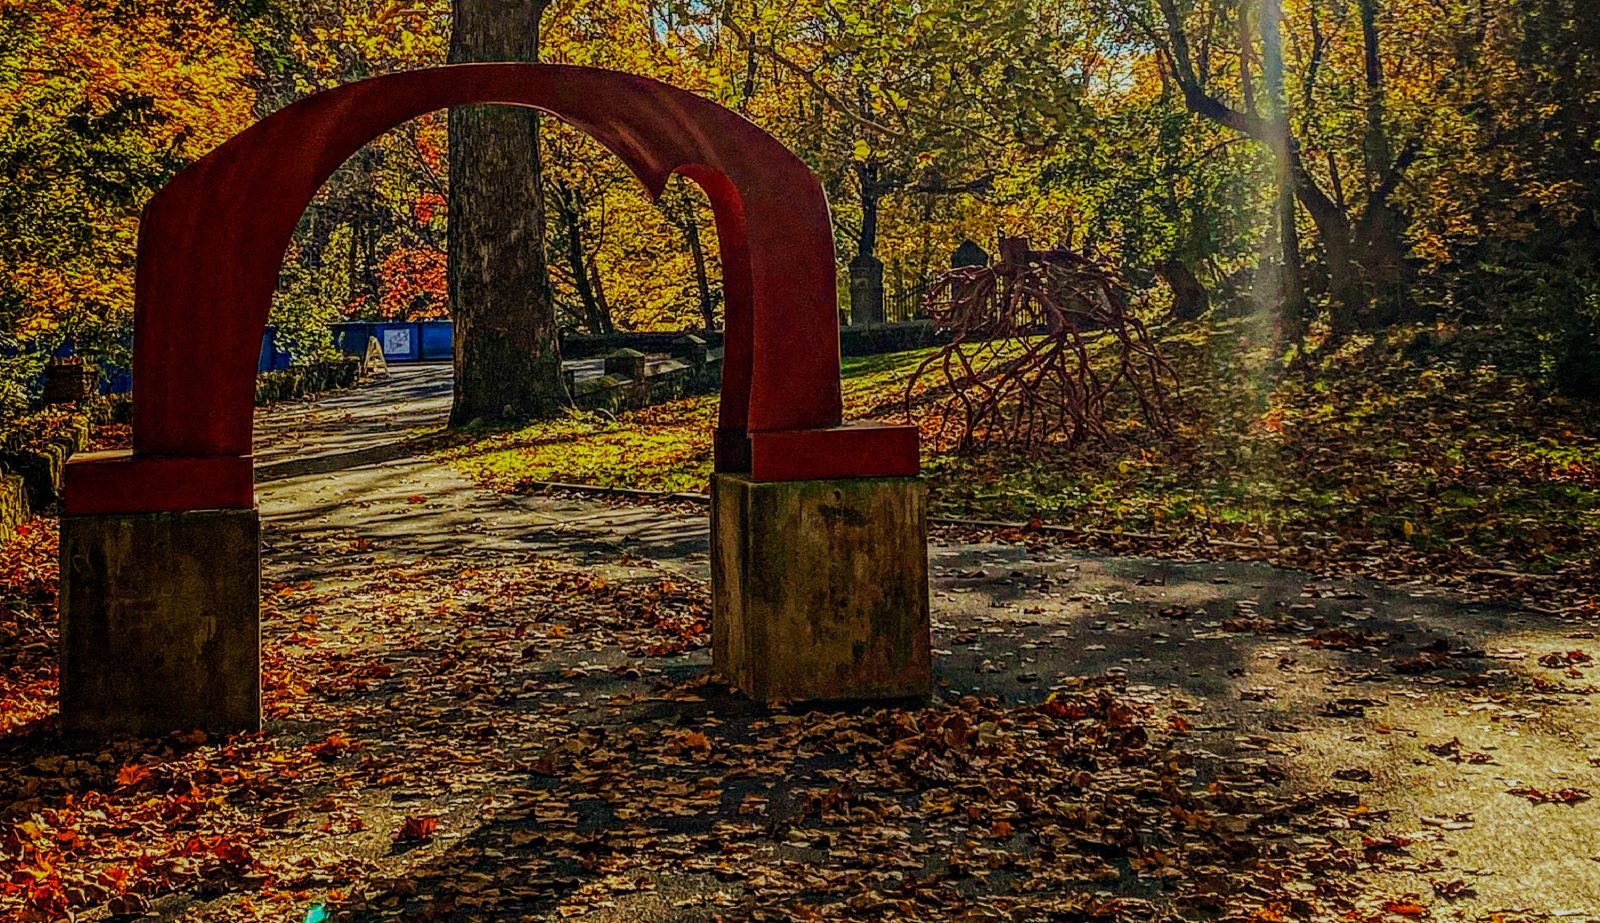 The iconic red arch sculpture amid autumn leaves and the Late Bronze Root sculpture behind it on the Karl Stirner Arts Trail in Easton, Pennsylvania.